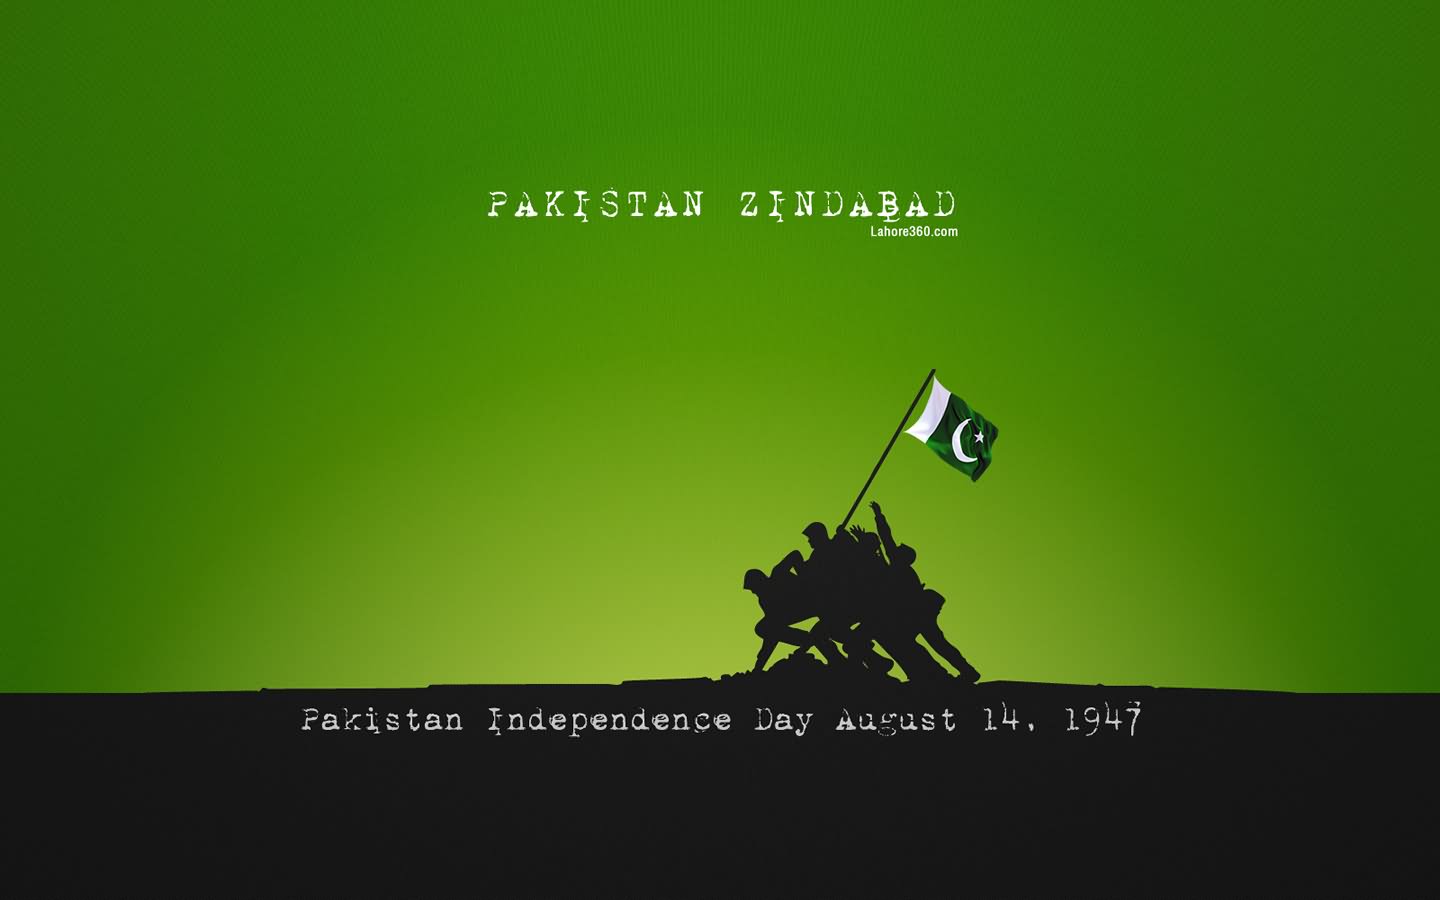 Pakistan Independence Day August 14, 1947